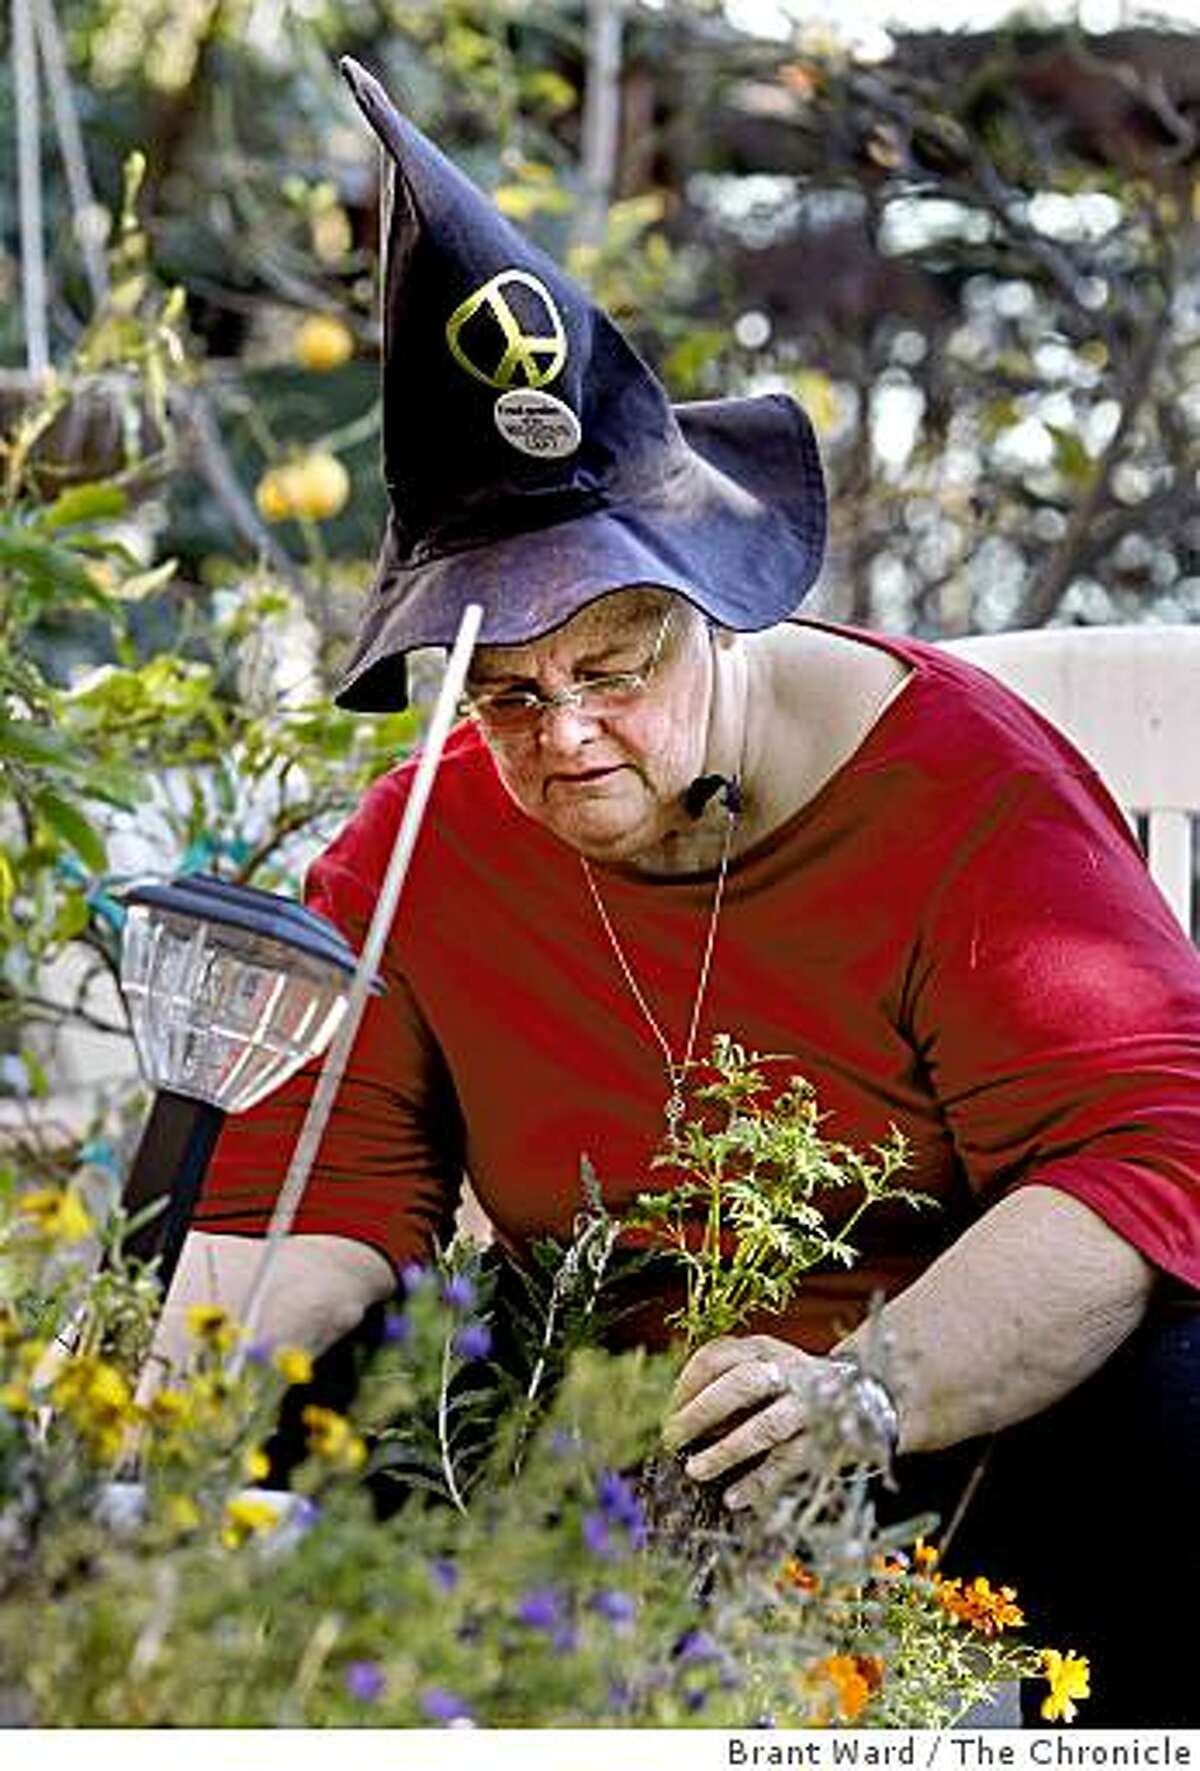 Victoria does some container planting in her backyard, which is covered with flowers. Victoria Slind-Flor, a veteran witch from Oakland, has been named the Keeper of the Light at this years 8th annual Pagan Festival in Berkeley.